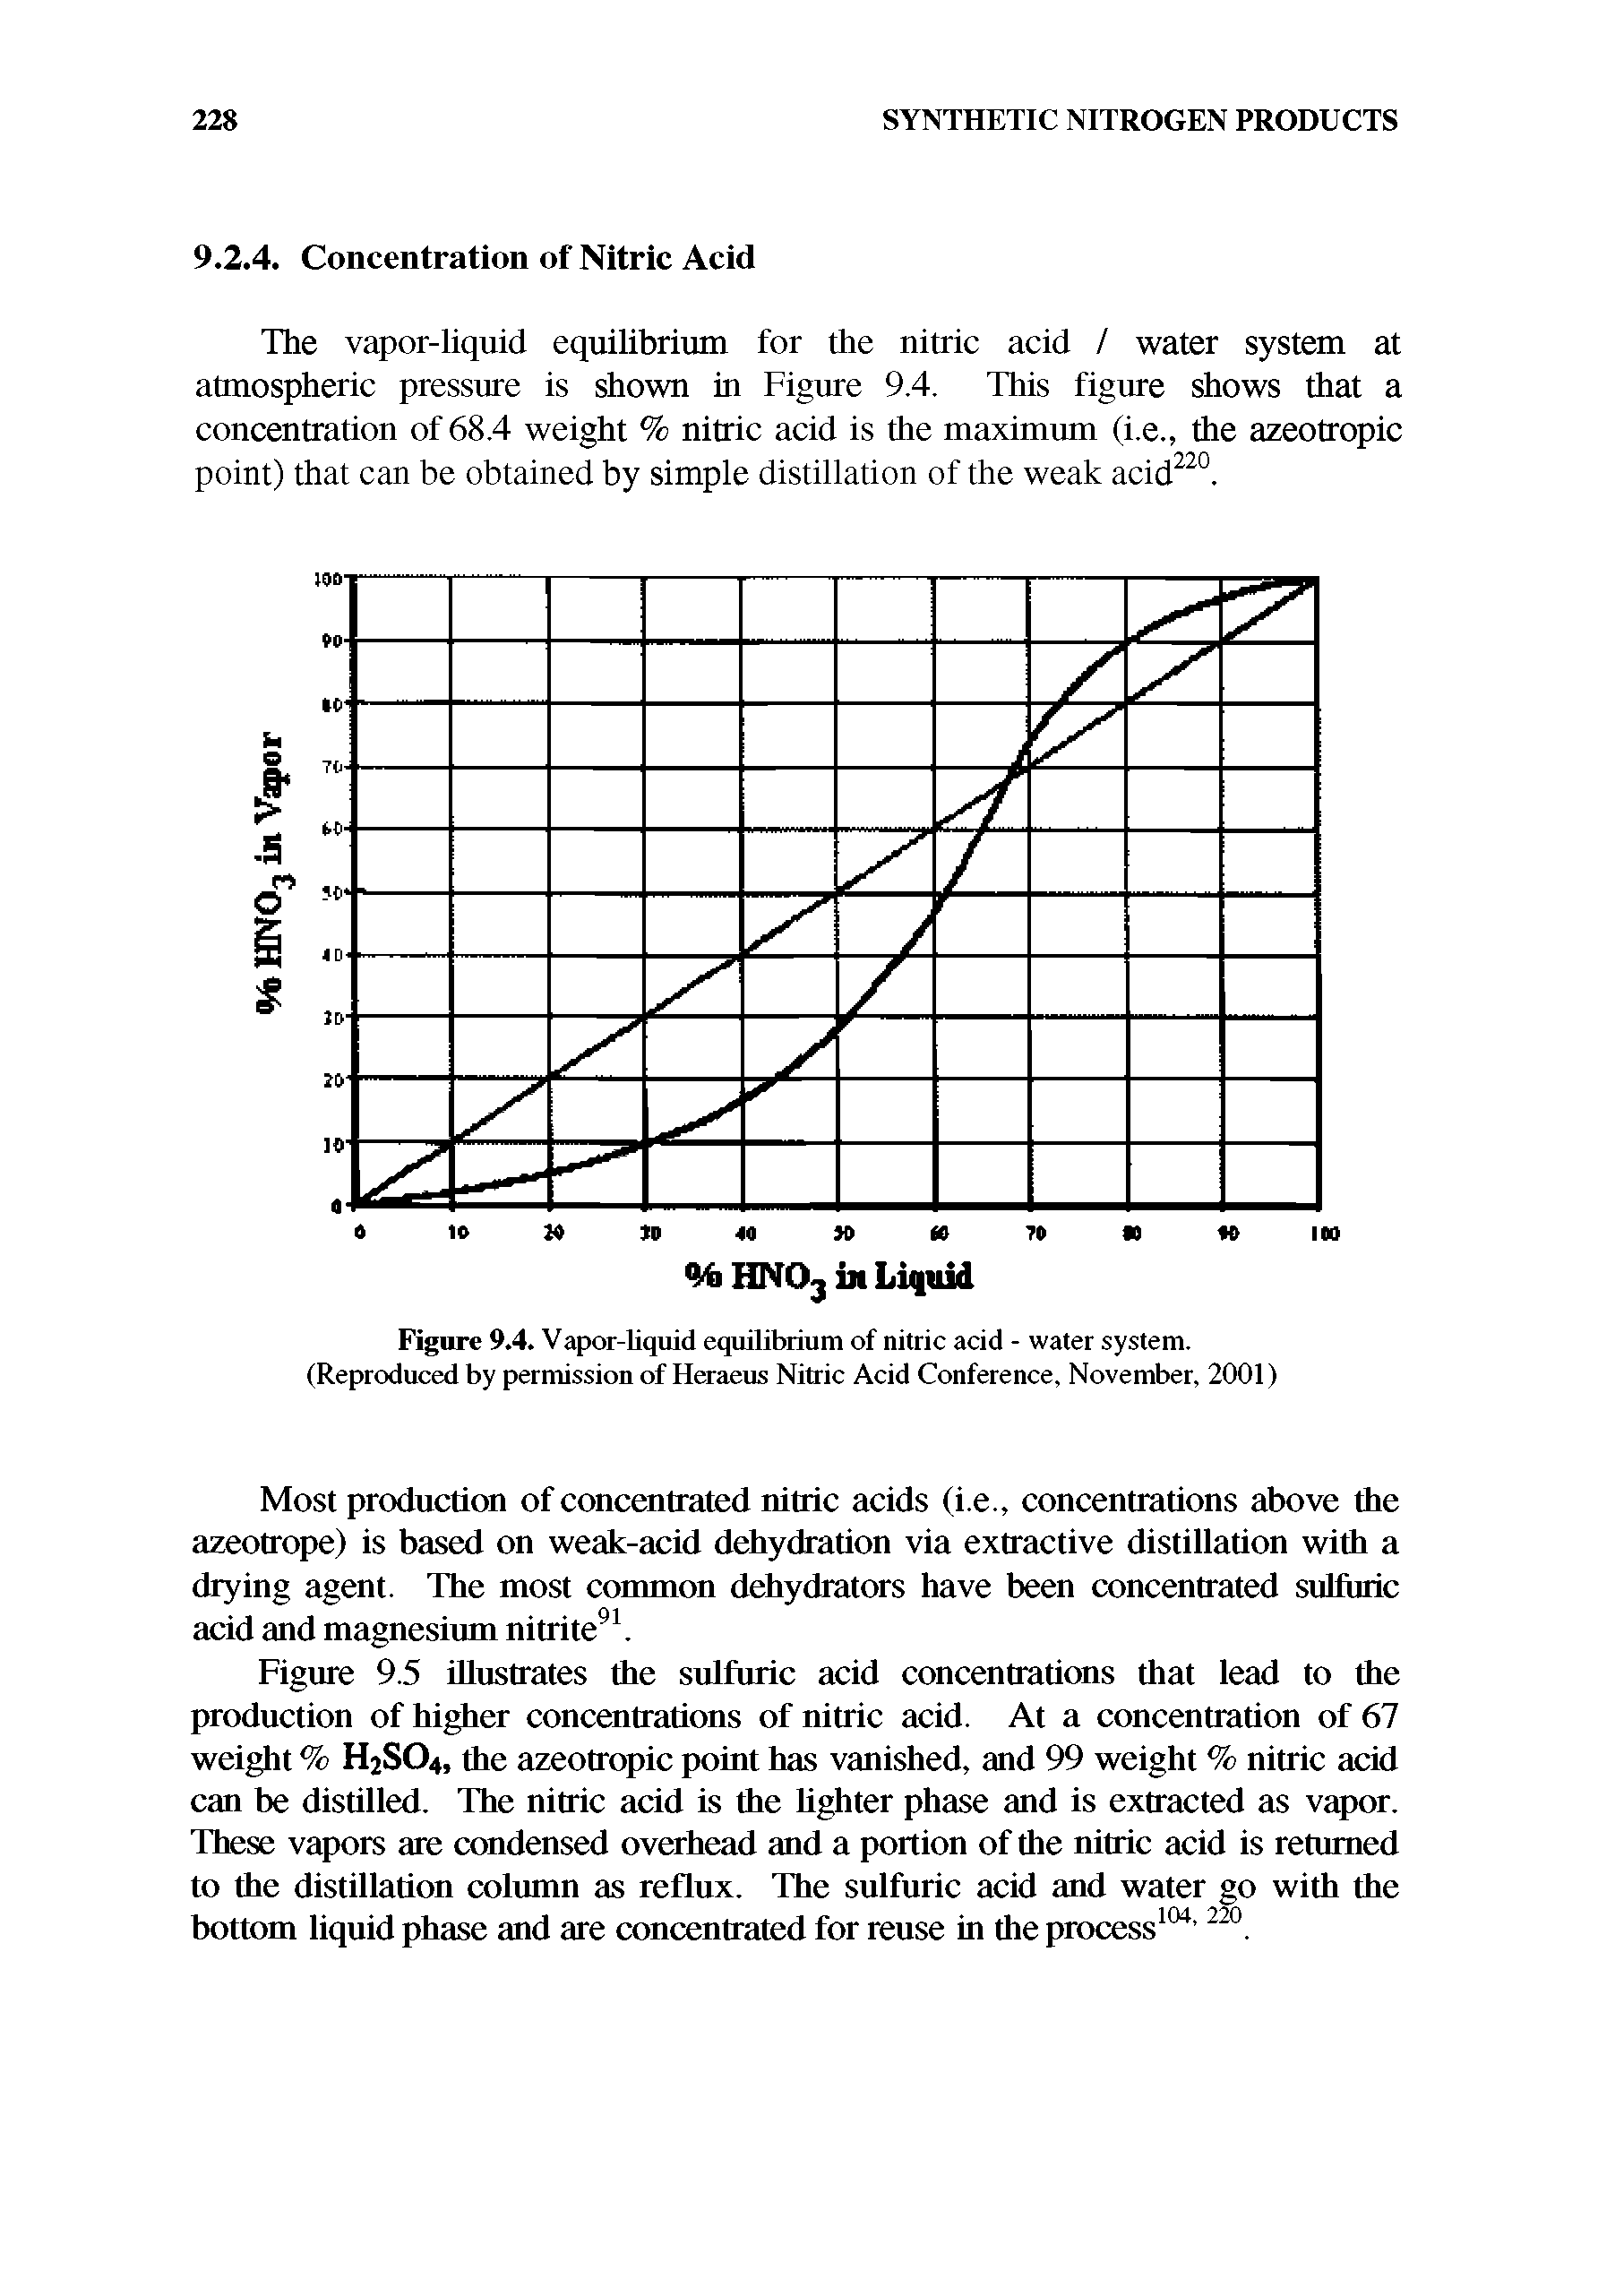 Figure 9.4. Vapor-liquid equilibrium of nitric acid - water system. (Reproduced by permission of Heraeus Nitric Acid Conference, November, 2001)...